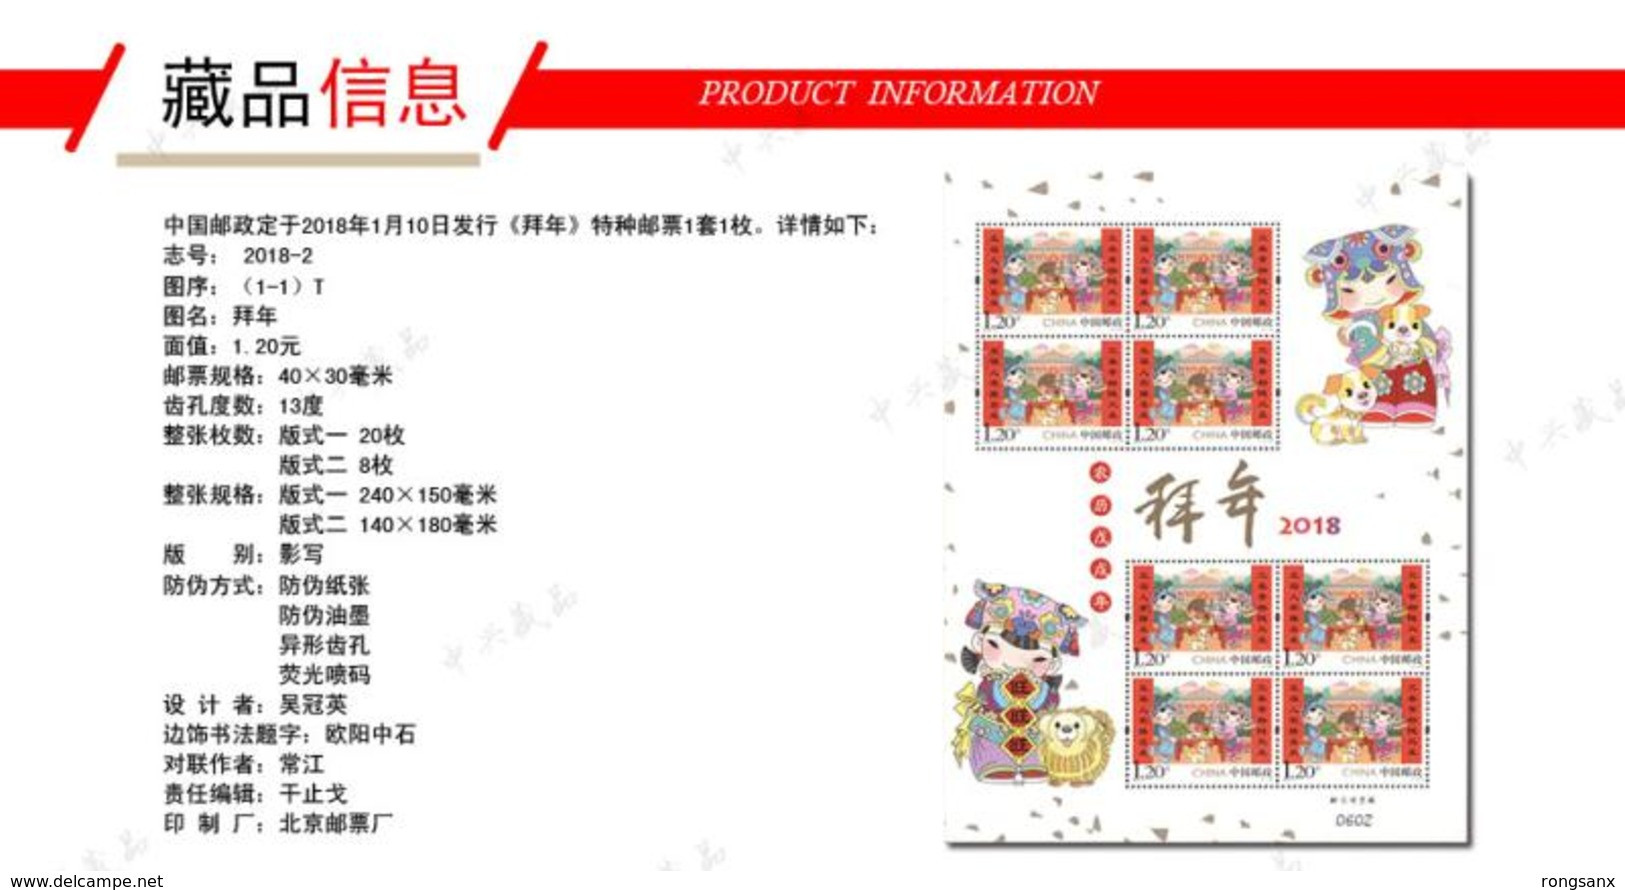 China 2018 SHEETLET YEAR PACK INCLUDE 15 SHEETLETS SEE PIC INCLUDE ALBUM - Full Years